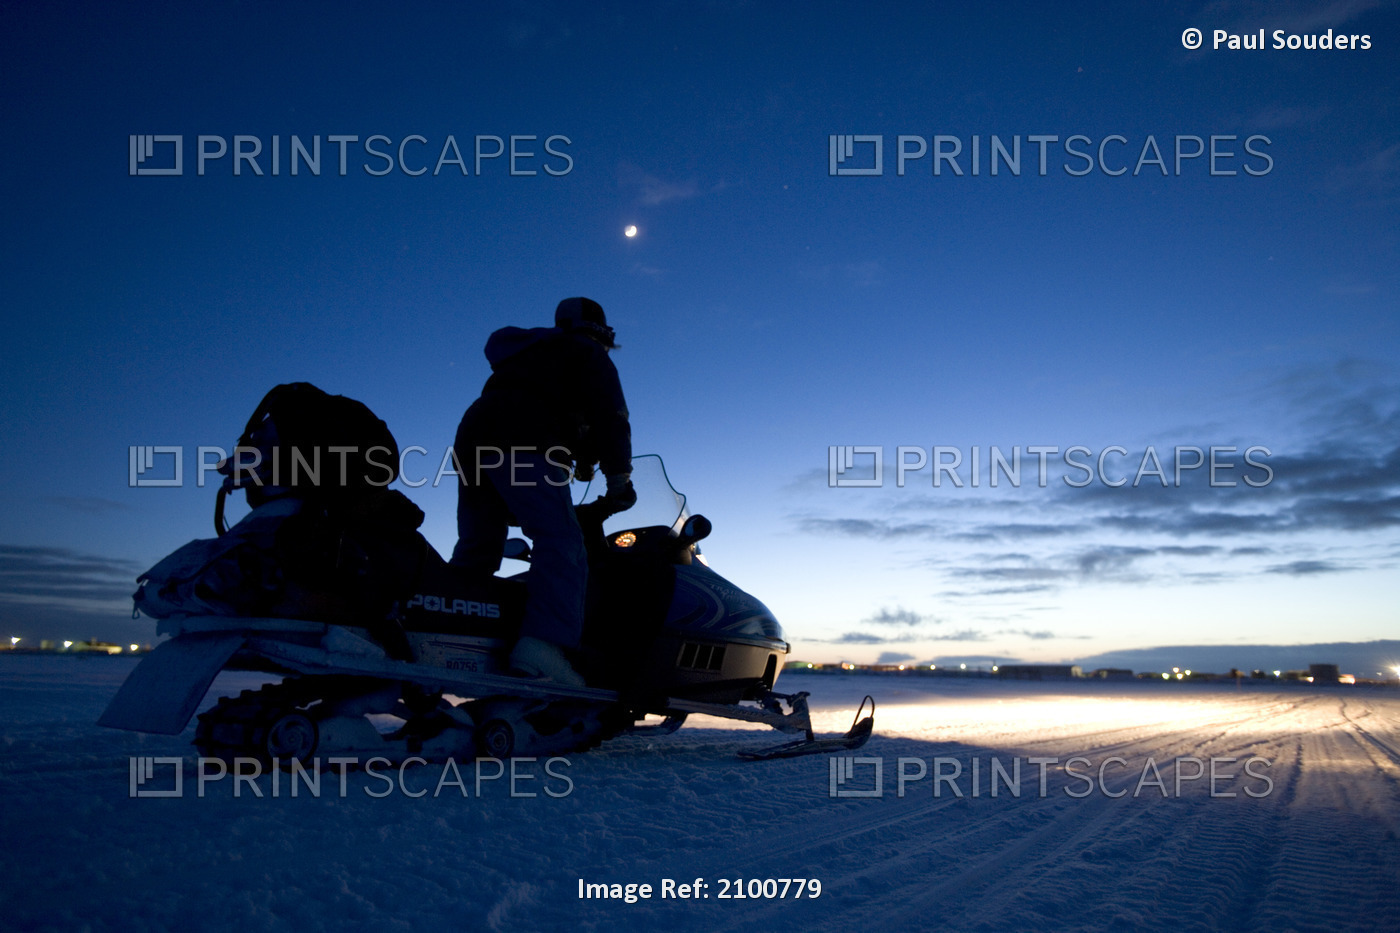 Man Rides A Snowmobile On Sea Ice Under Crescent Moon At Dusk Along The Bering ...